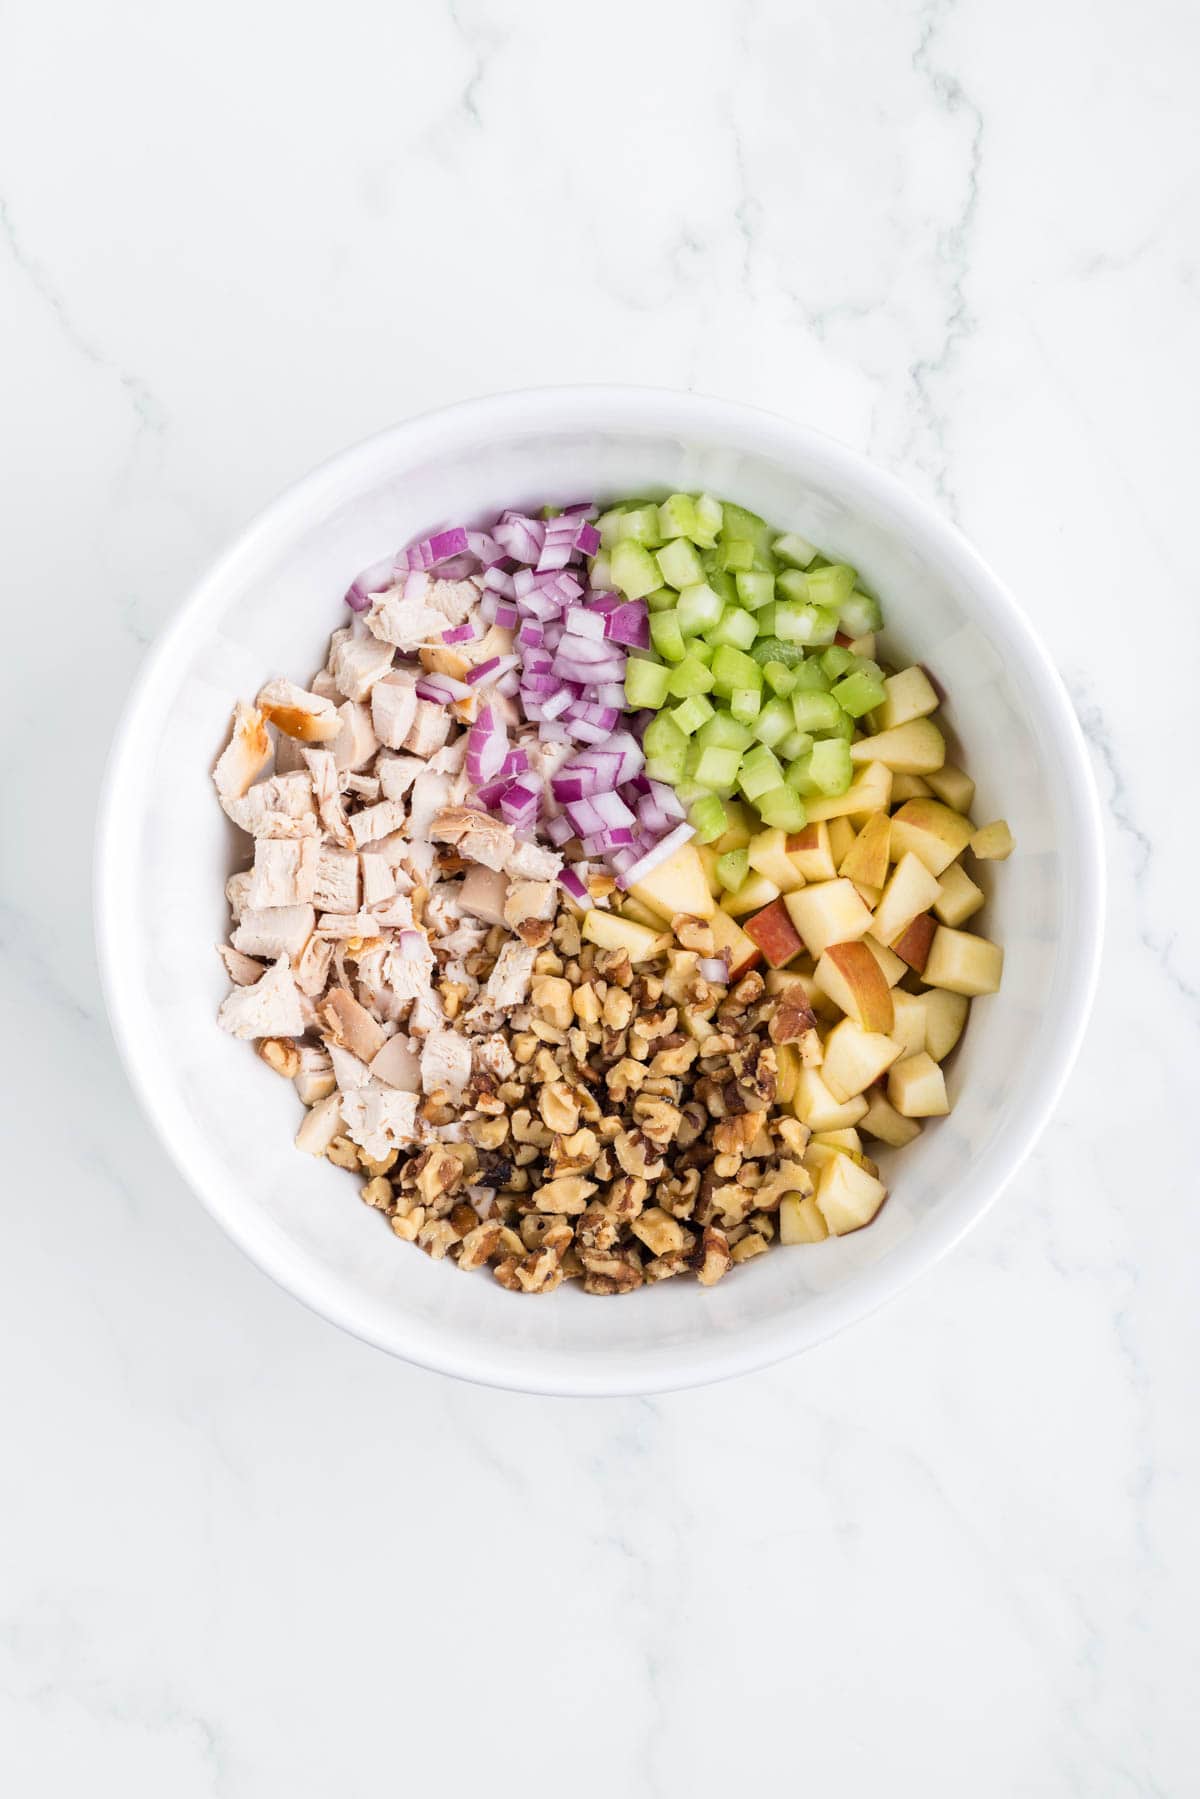 diced chicken, red onions, celery, apples and chopped walnuts in a mixing bowl